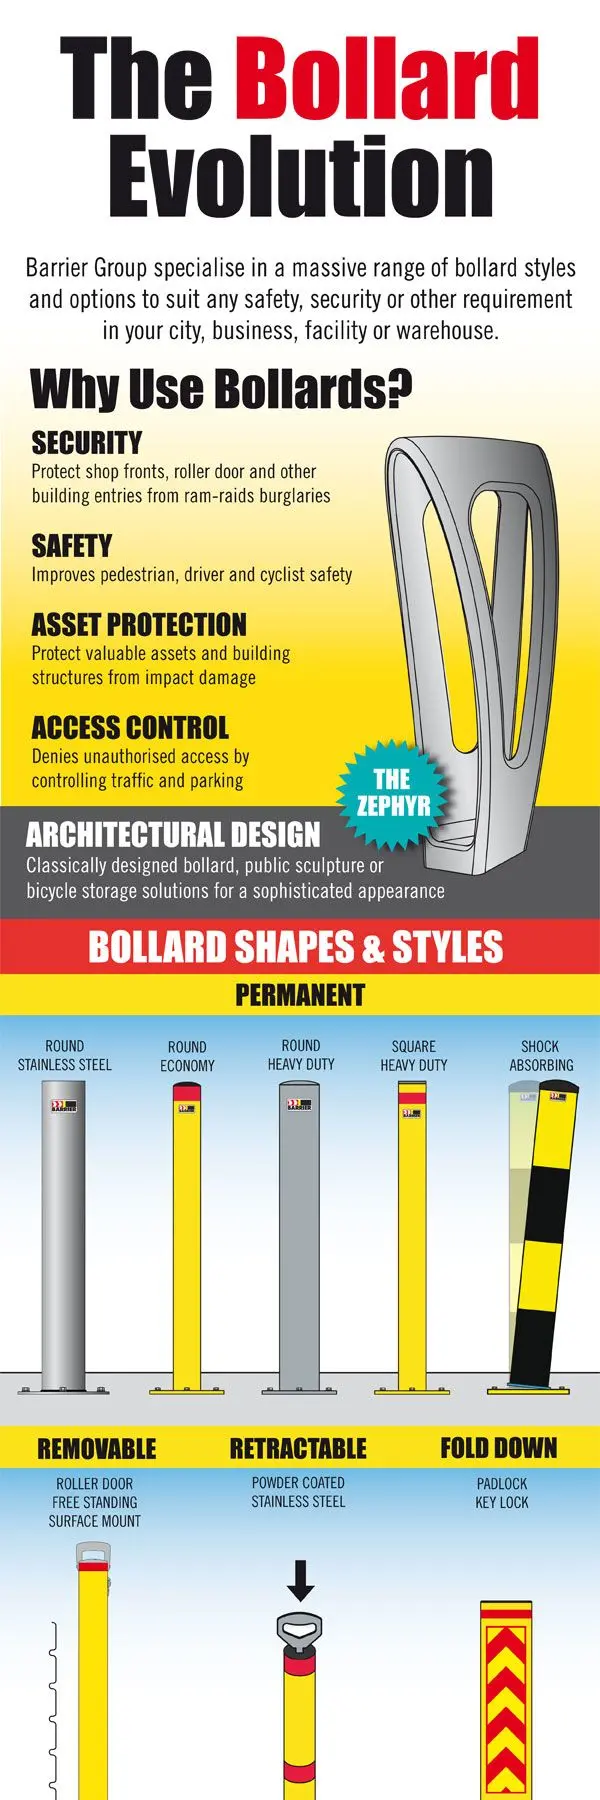 What are Bollards? What Bollards Do I Need? [infographic]